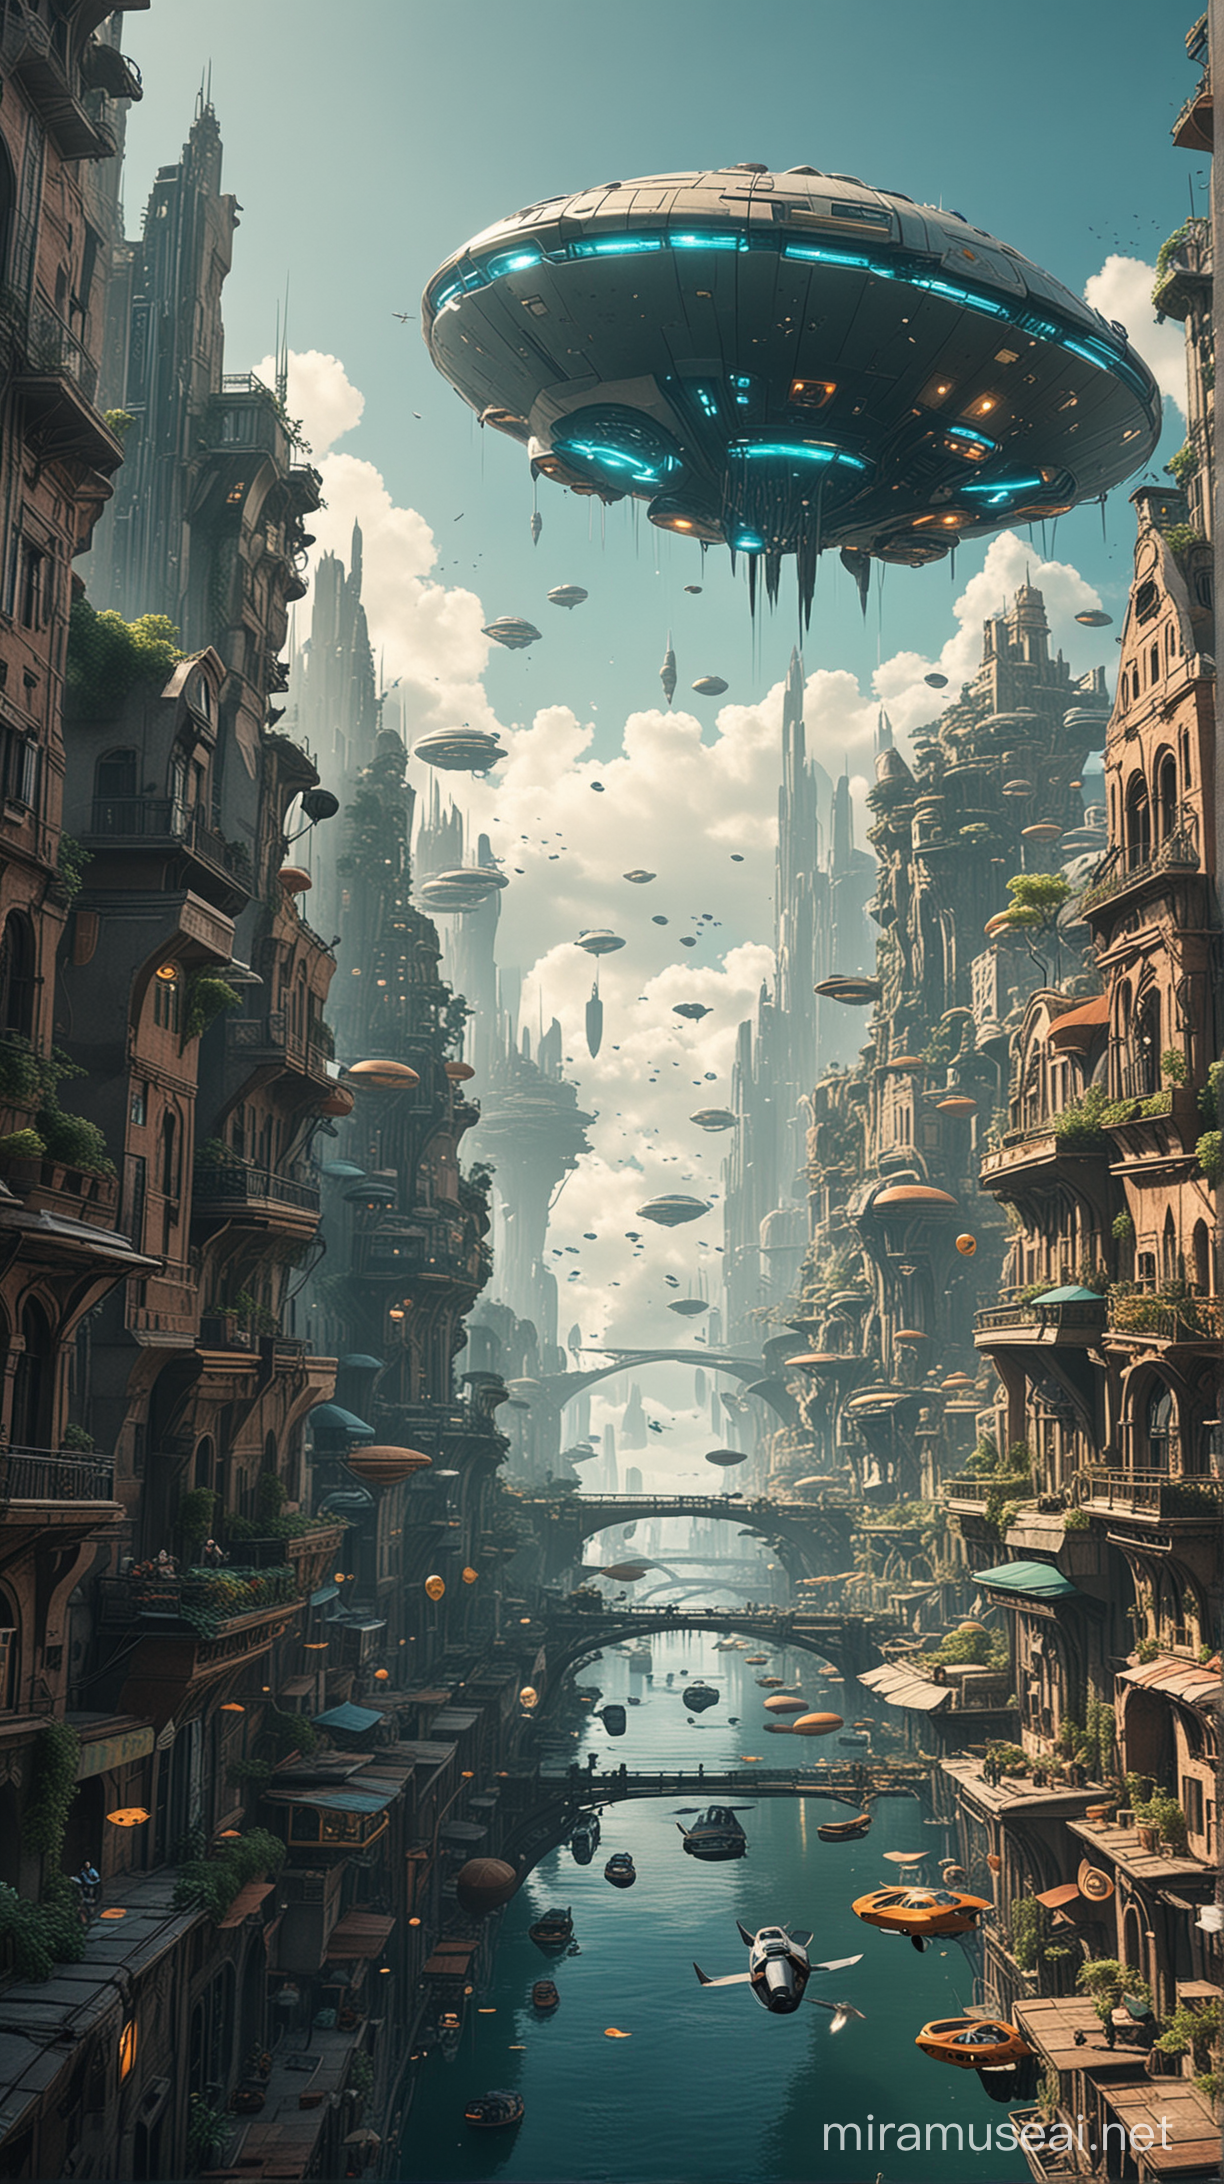 In the beautiful futuristic city you can see many people flying without using any artifact also you can see the floating cities that give a contrast between technology and nature.